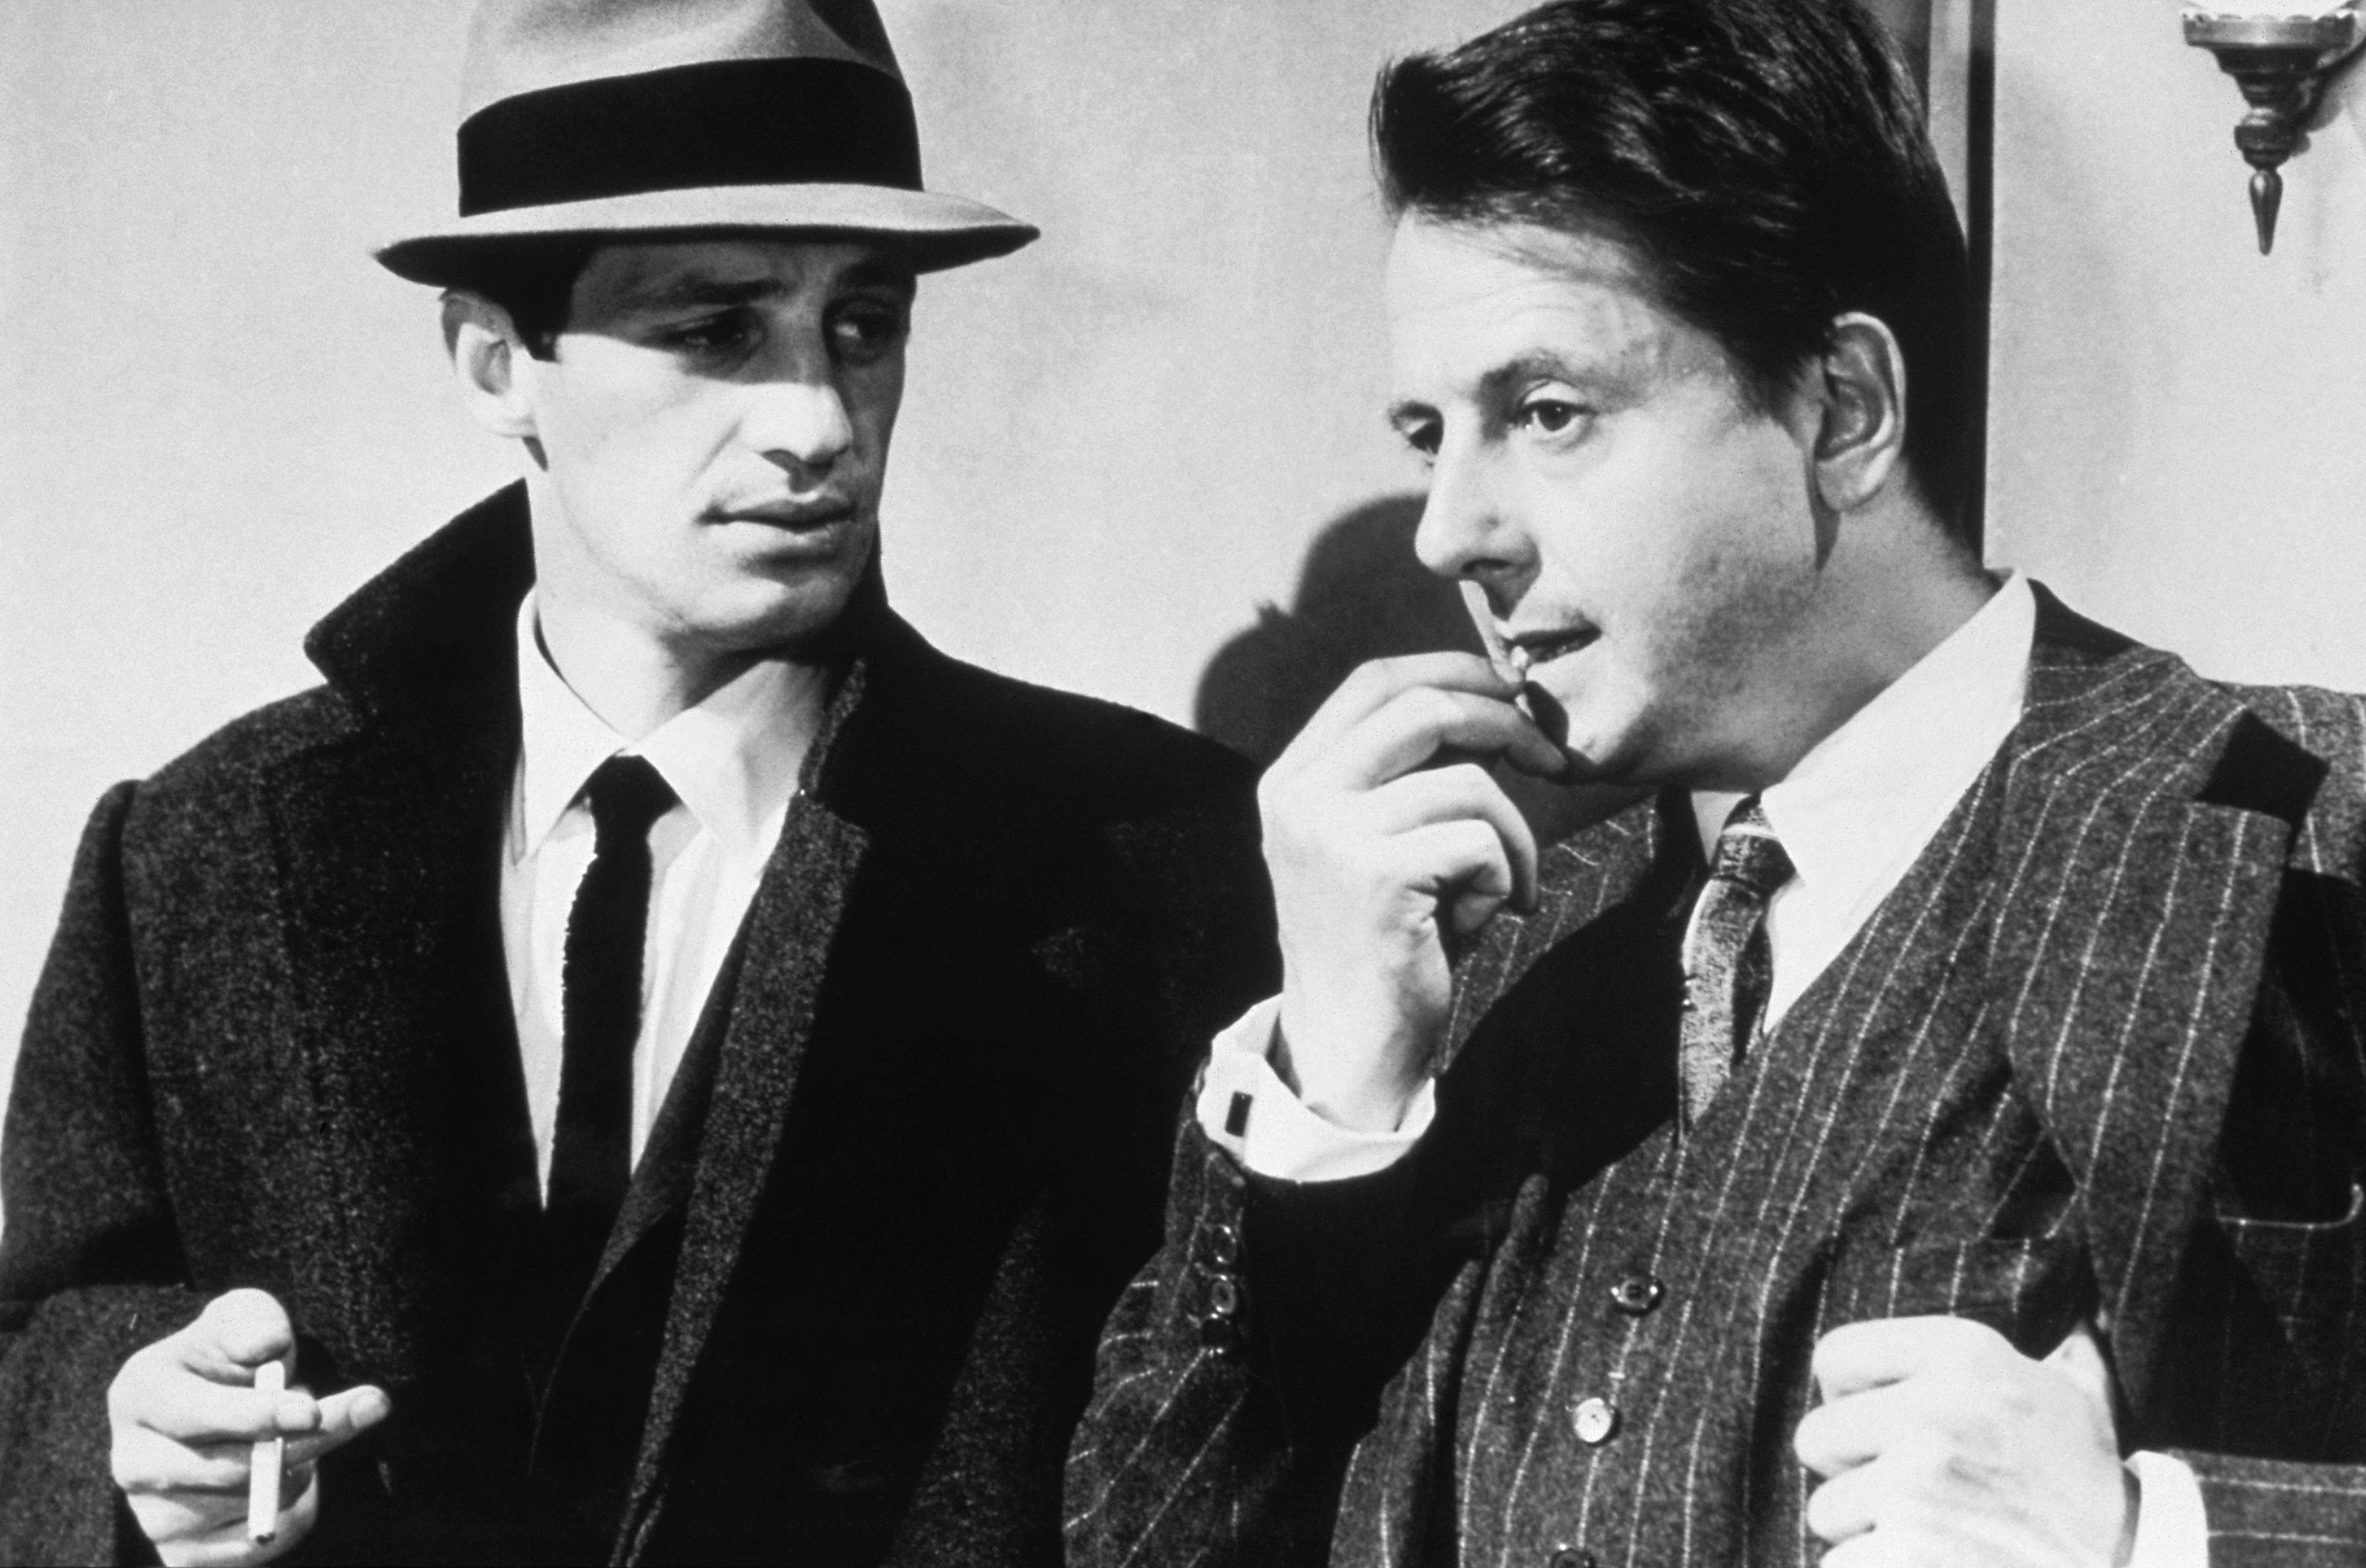 Still of Jean-Paul Belmondo and Jean Desailly in Le doulos (1962)